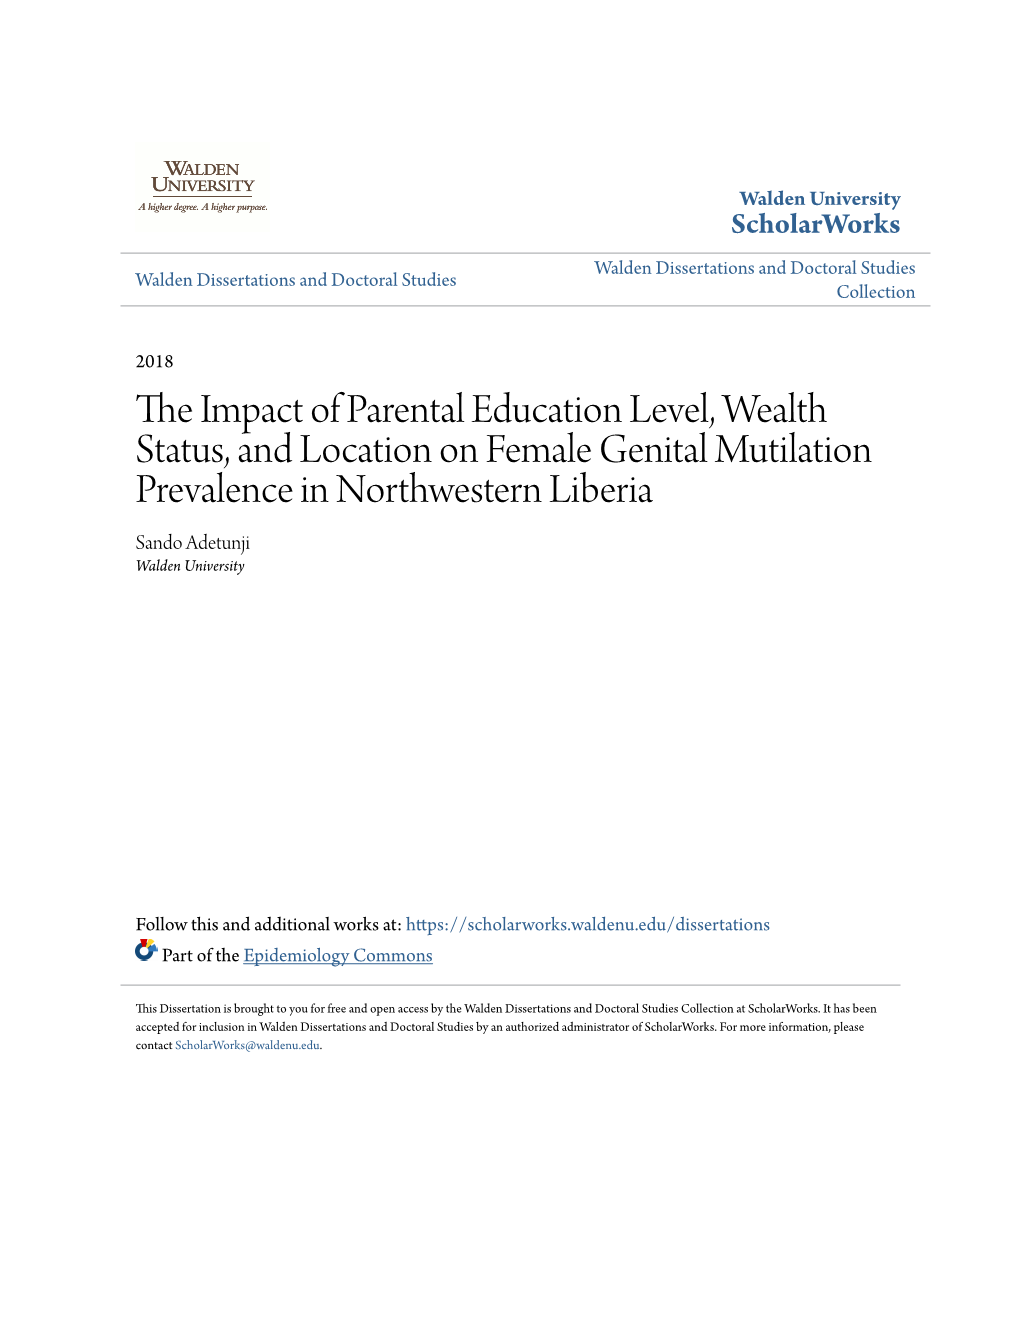 The Impact of Parental Education Level, Wealth Status, and Location on Female Genital